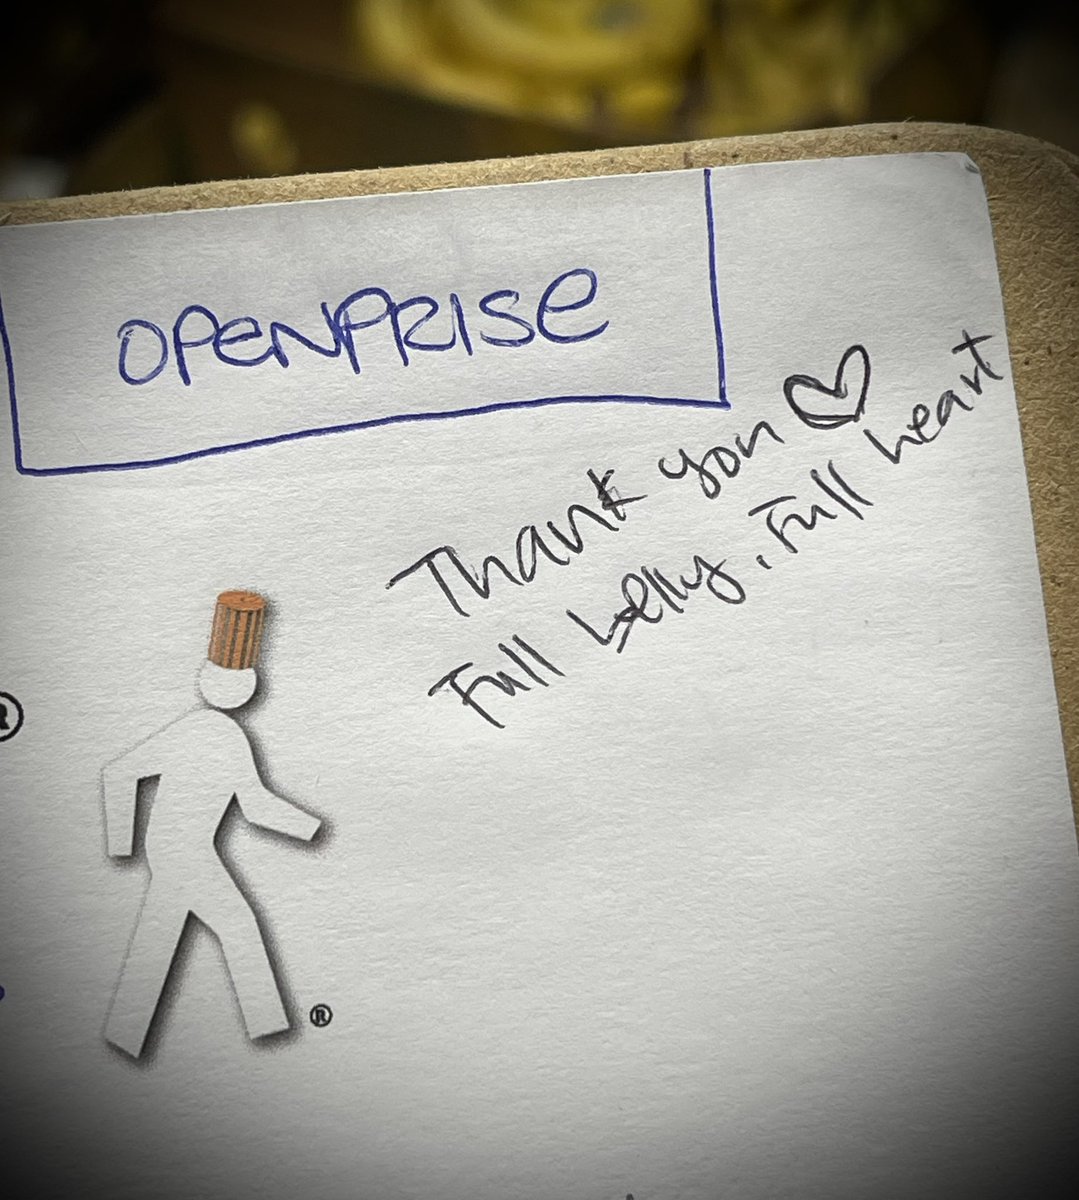 We LOVE our customers!! A team from @OpenpriseTech just left me a cute little post-tour note (which means everything!!) “Thank You ❤️ Full Belly, Full Heart” -  #FoodieAdventures #SF #Food #Tours #TeamBuilding #Openprise #FullBelly #FullHeart